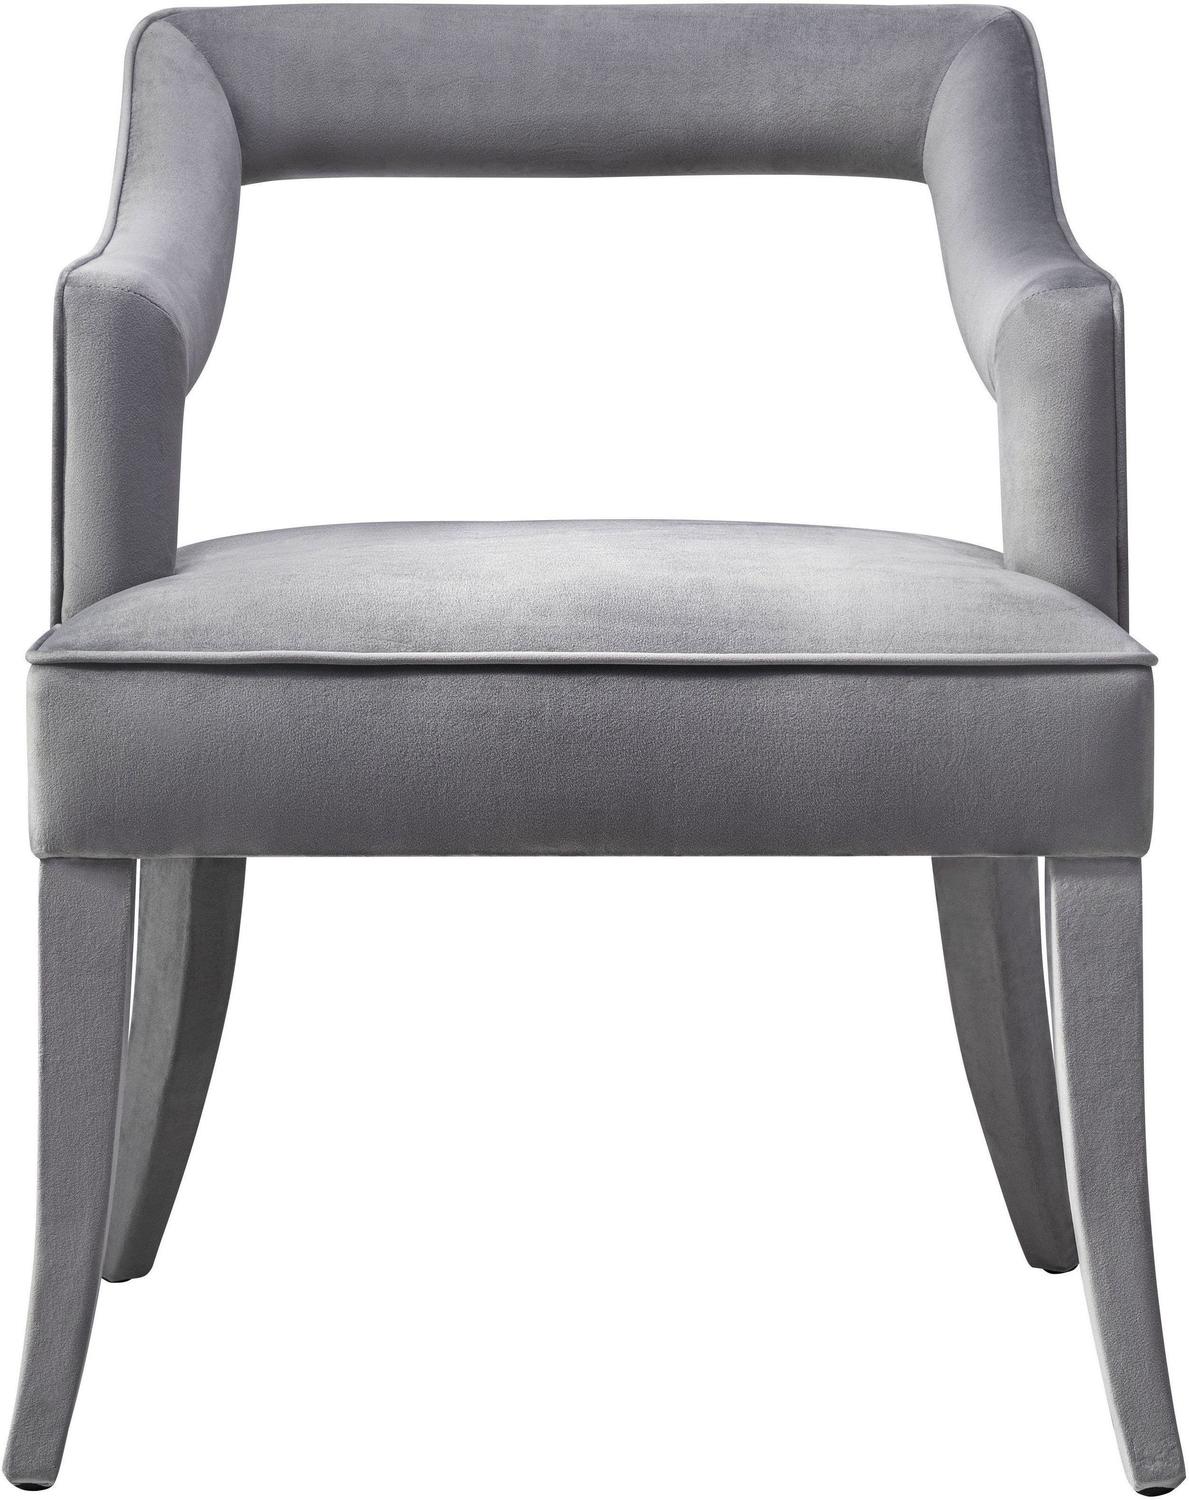 teal club chair Tov Furniture Dining Chairs Grey